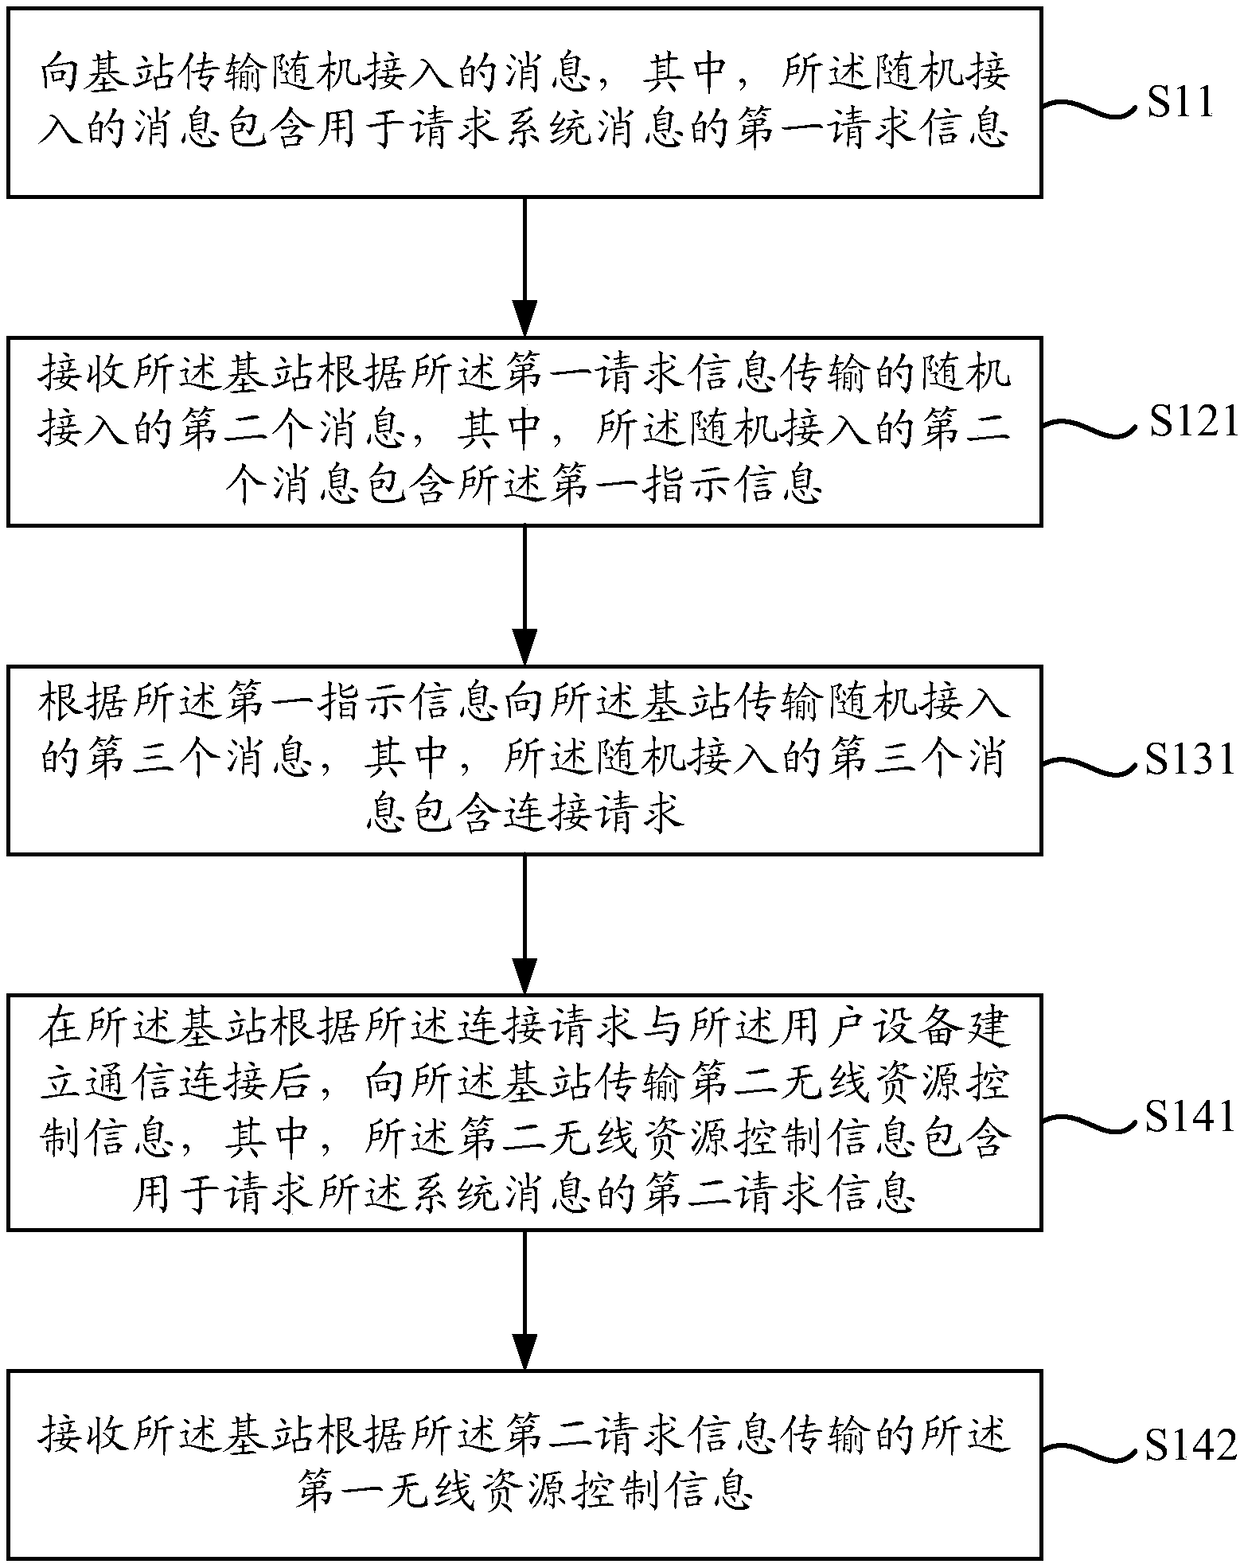 System message acquisition method and apparatus, and system message transmission method and apparatus